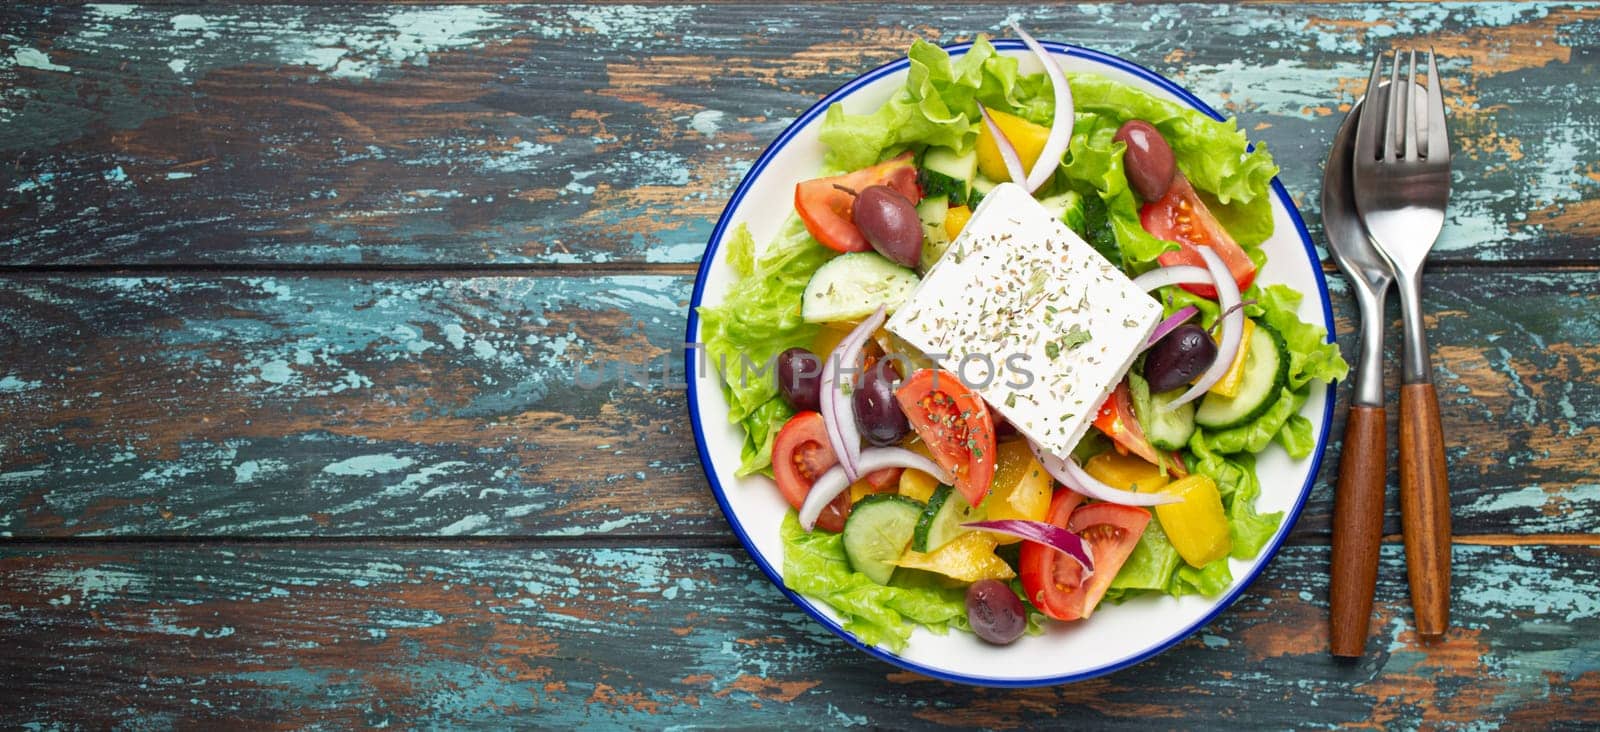 Traditional Greek Salad with Feta Cheese, Tomatoes, Bell Pepper, Cucumbers, Olives, Herbs in white ceramic bowl on blue rustic wooden table background from above, Cuisine of Greece. Copy Space by its_al_dente